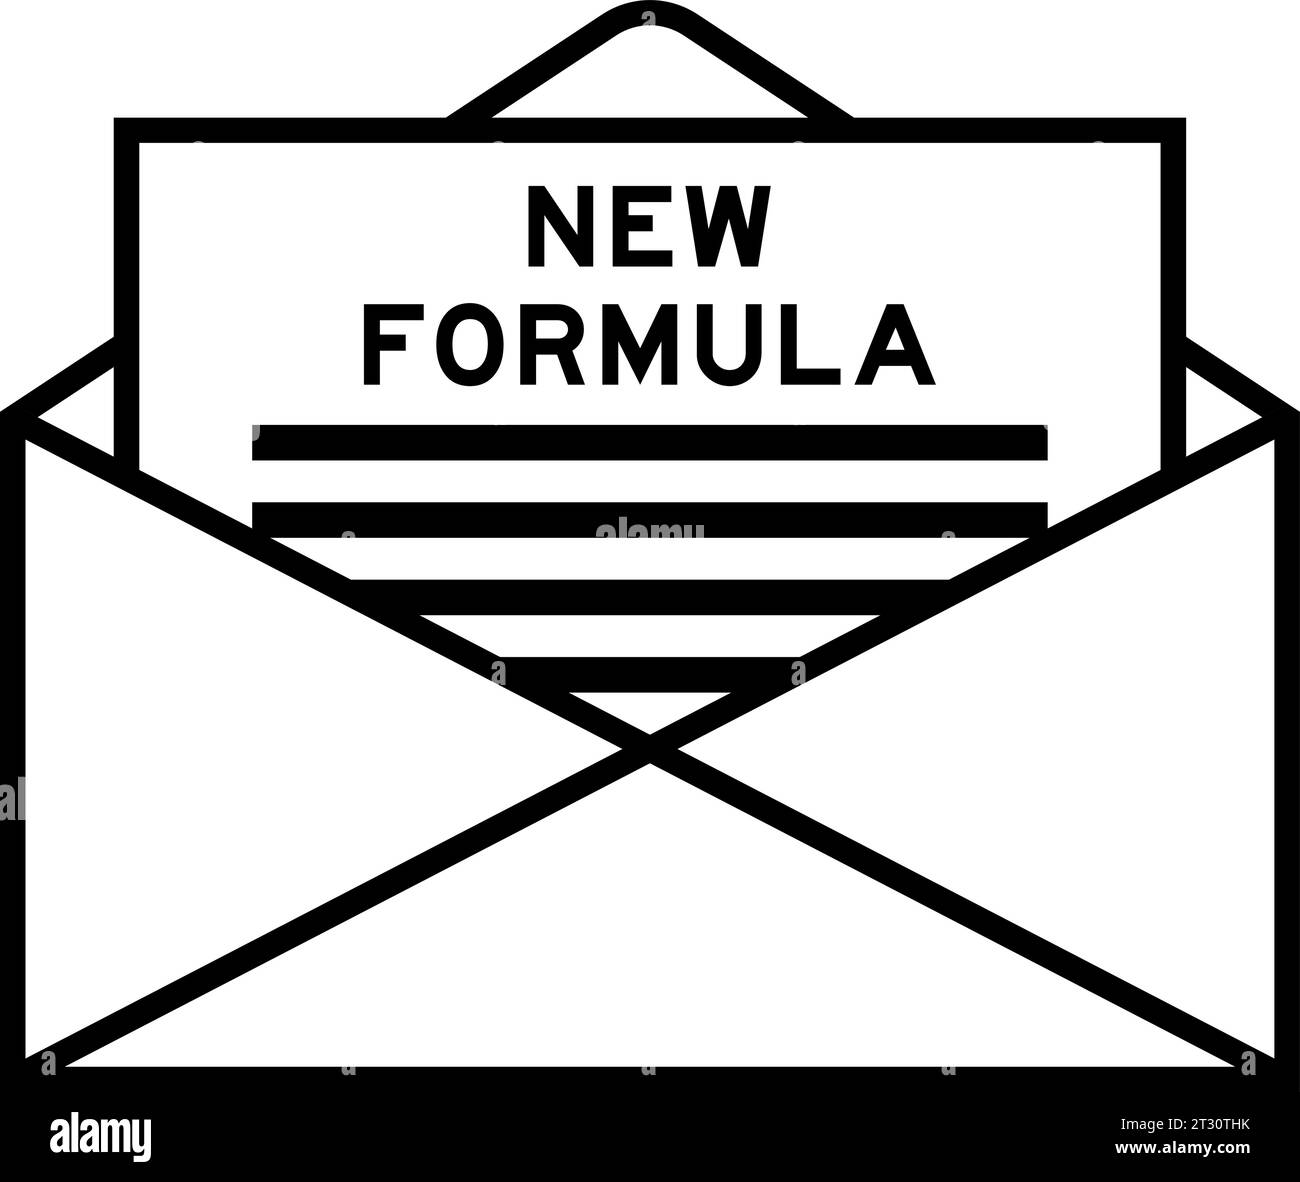 Envelope and letter sign with word new formula as the headline Stock Vector